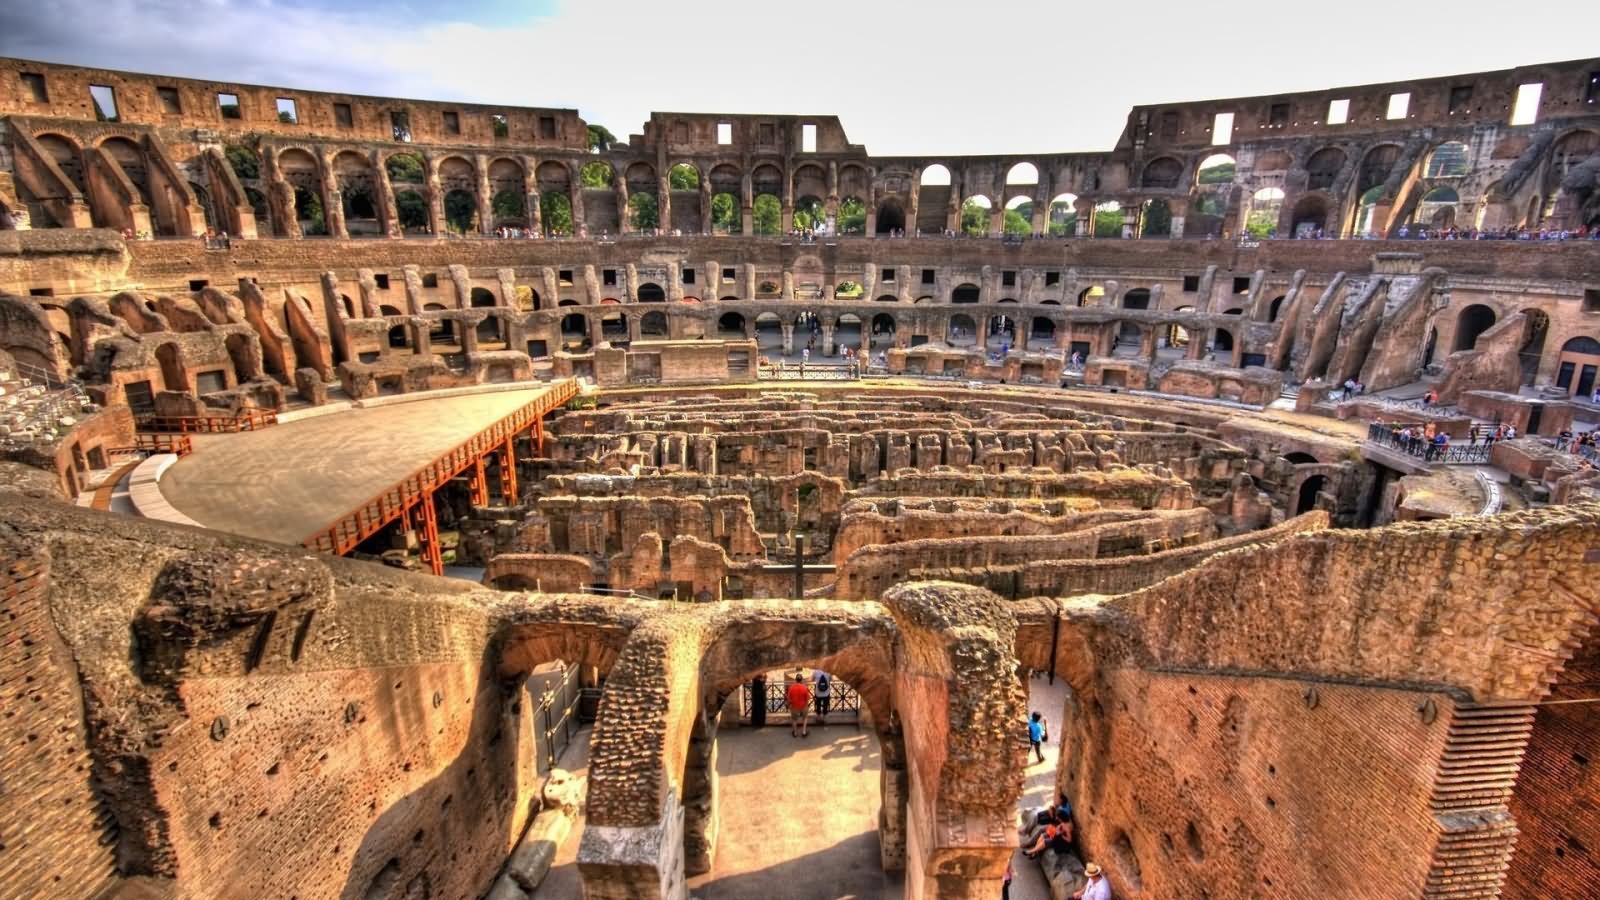 Amazing View Of The Colosseum